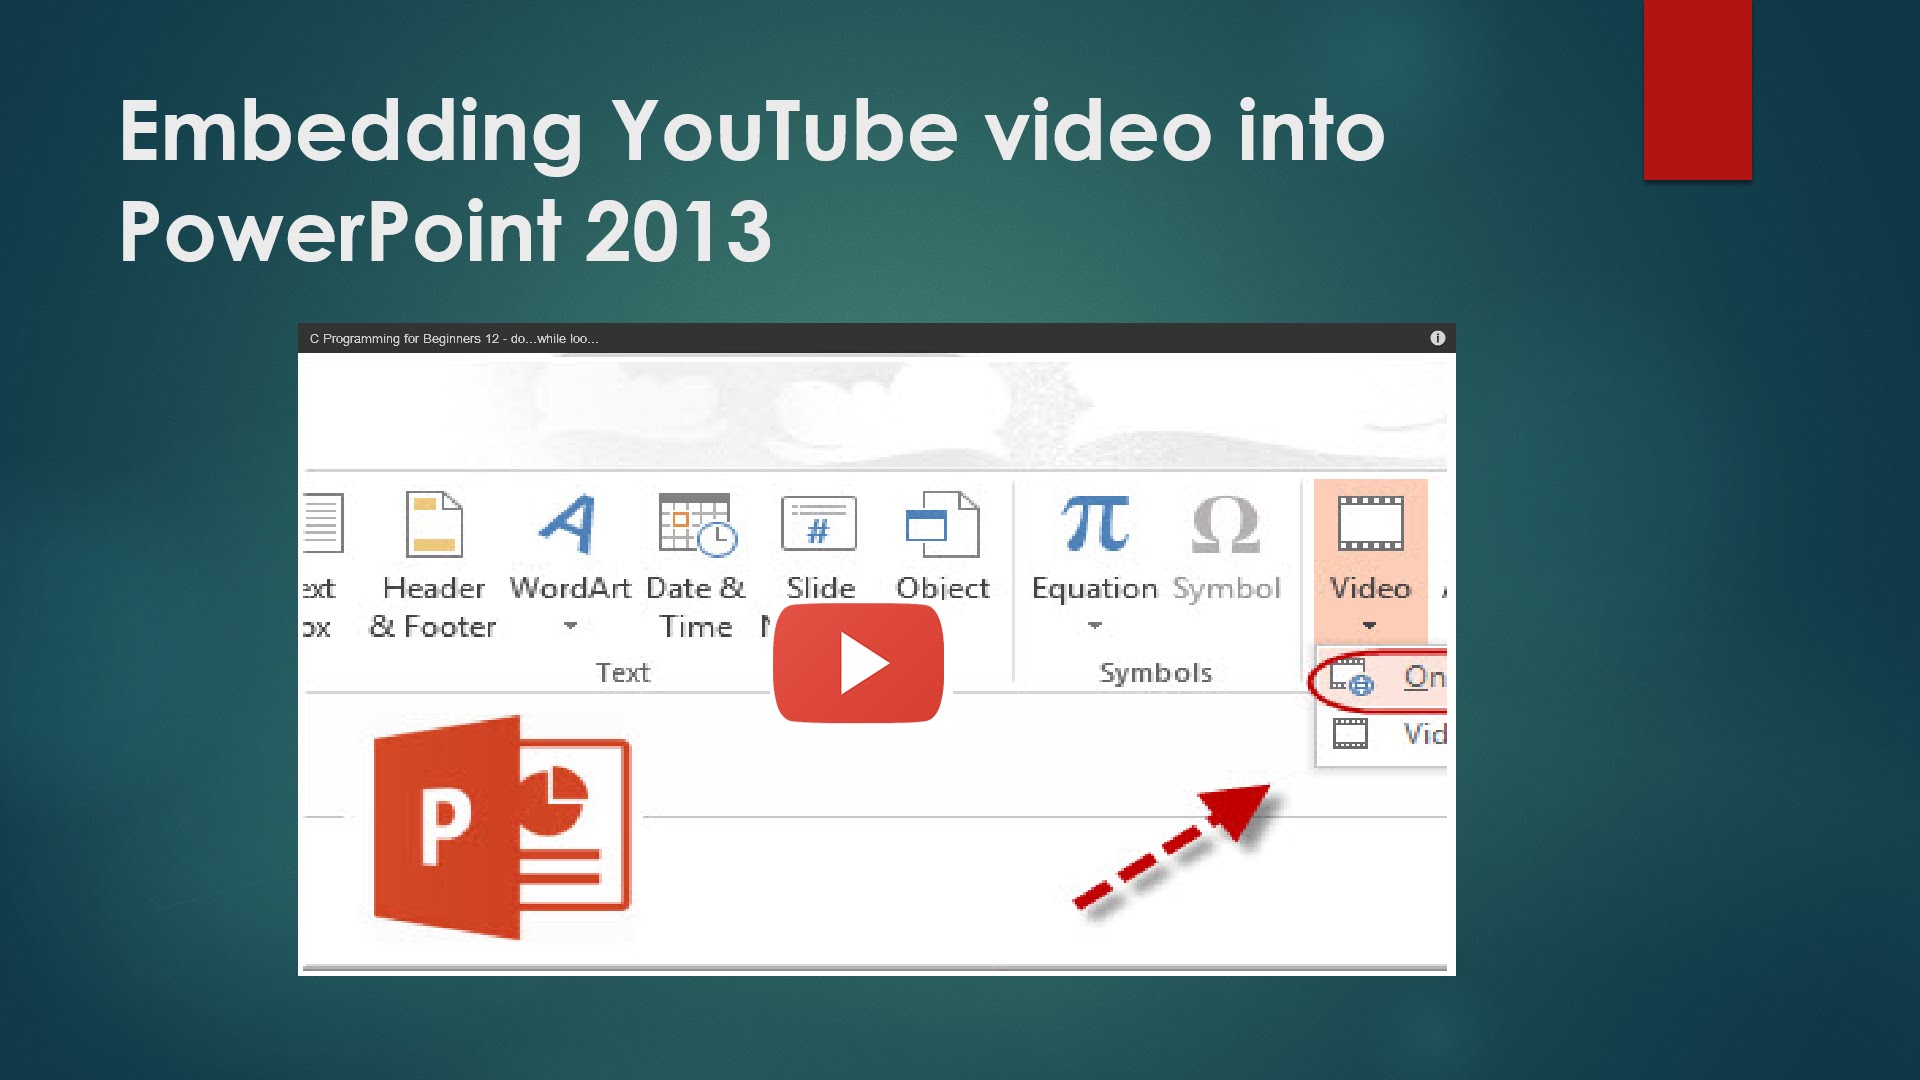 doecan i embed youtube video in powerpoint 365 for mac